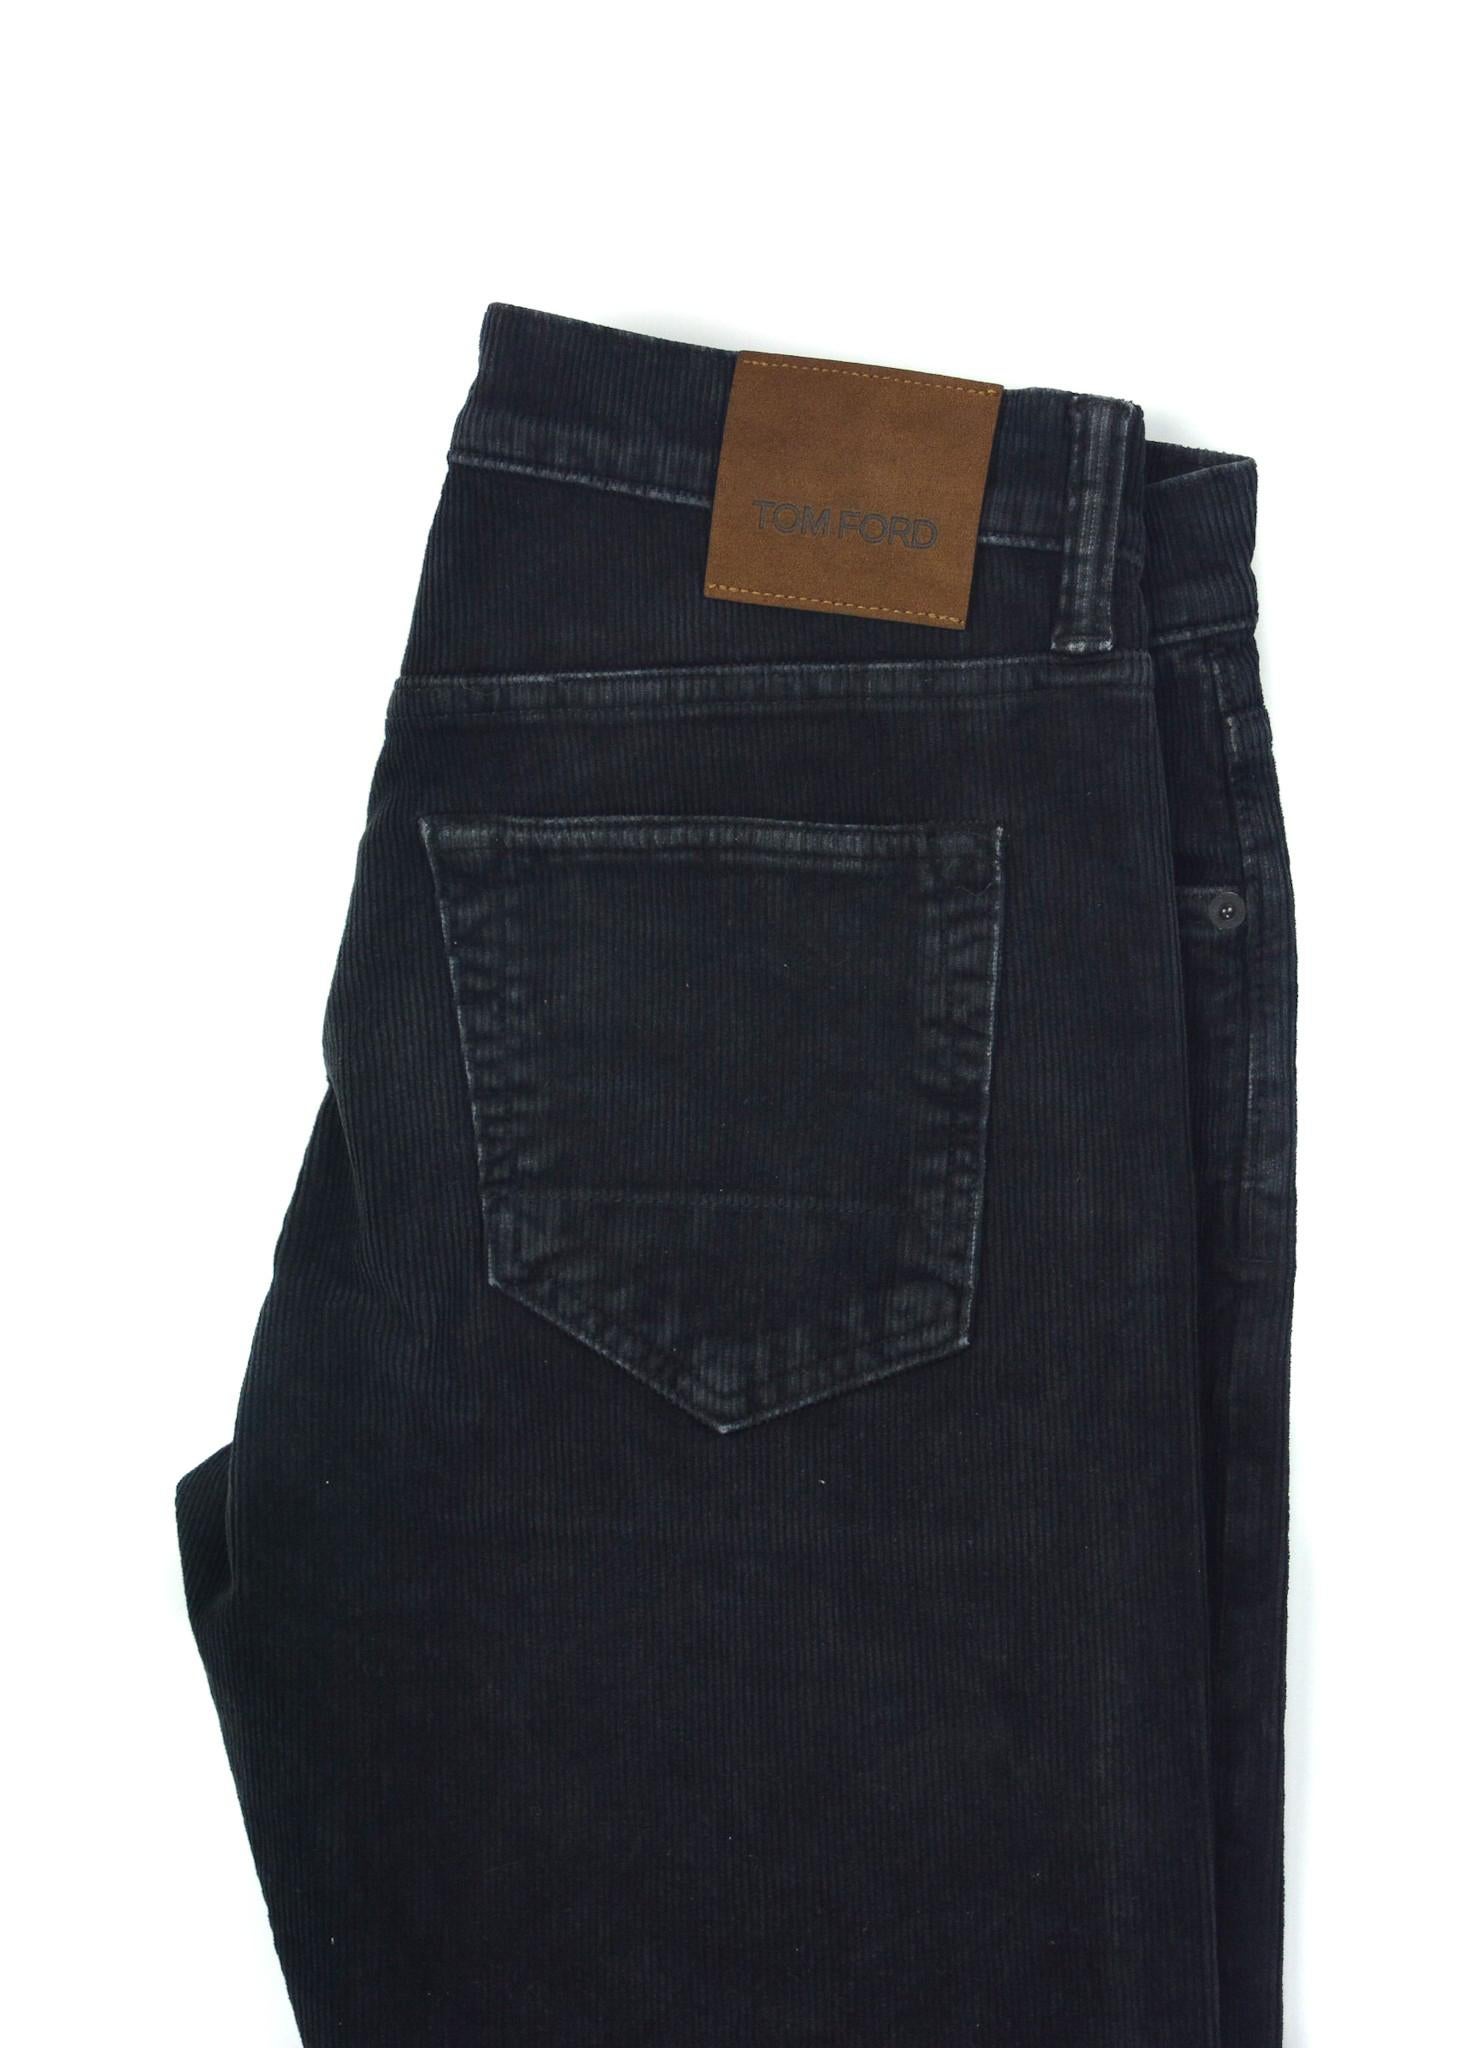 Tom Ford Men's Dark Grey Corduroy Straight Jeans In New Condition For Sale In Brooklyn, NY